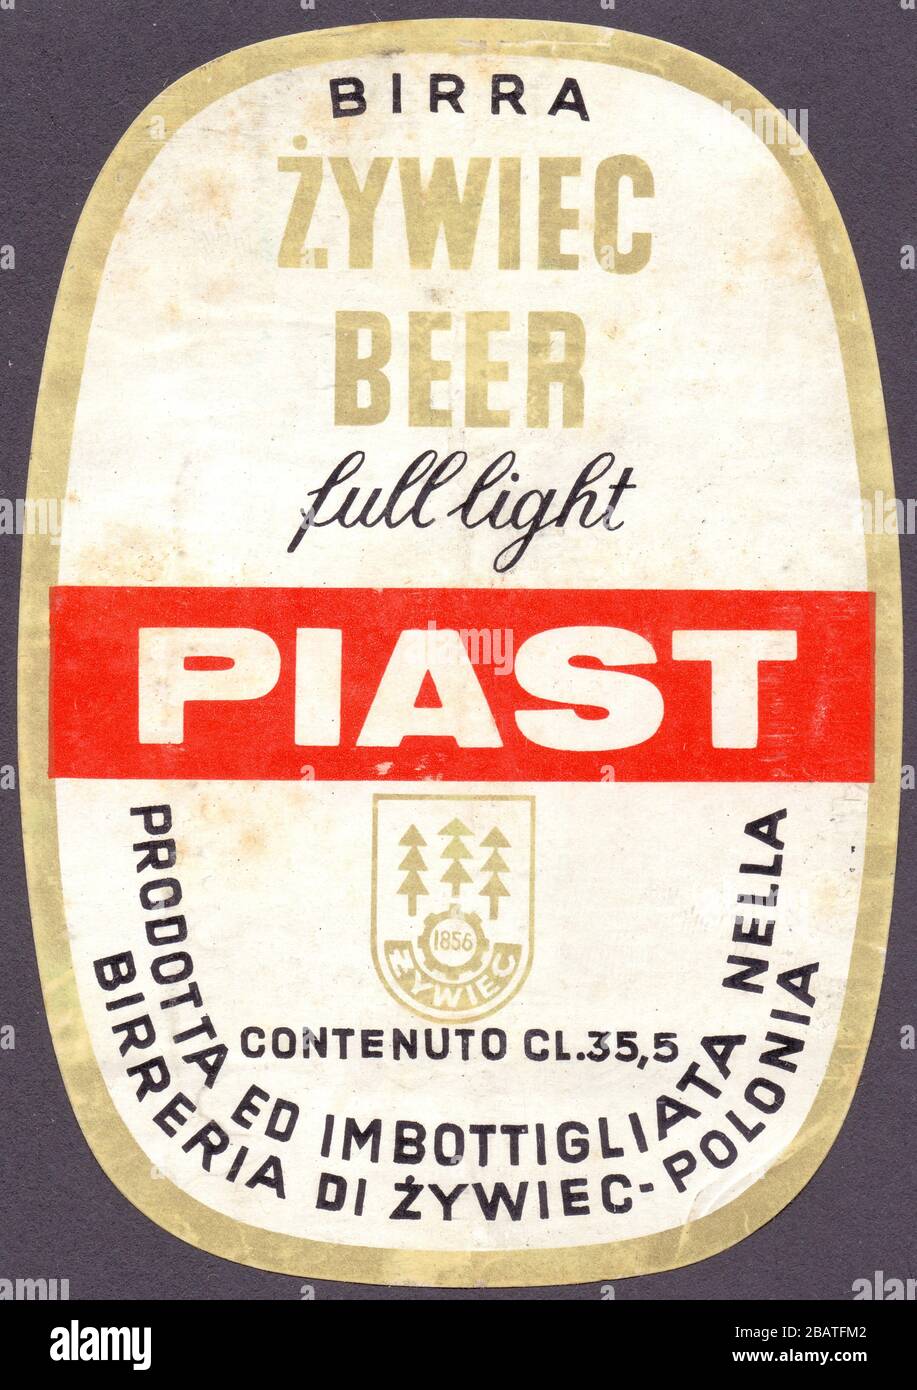 Etiquette ancienne.Pologne.Birra Zywiec beer full light Piast Stock Photo